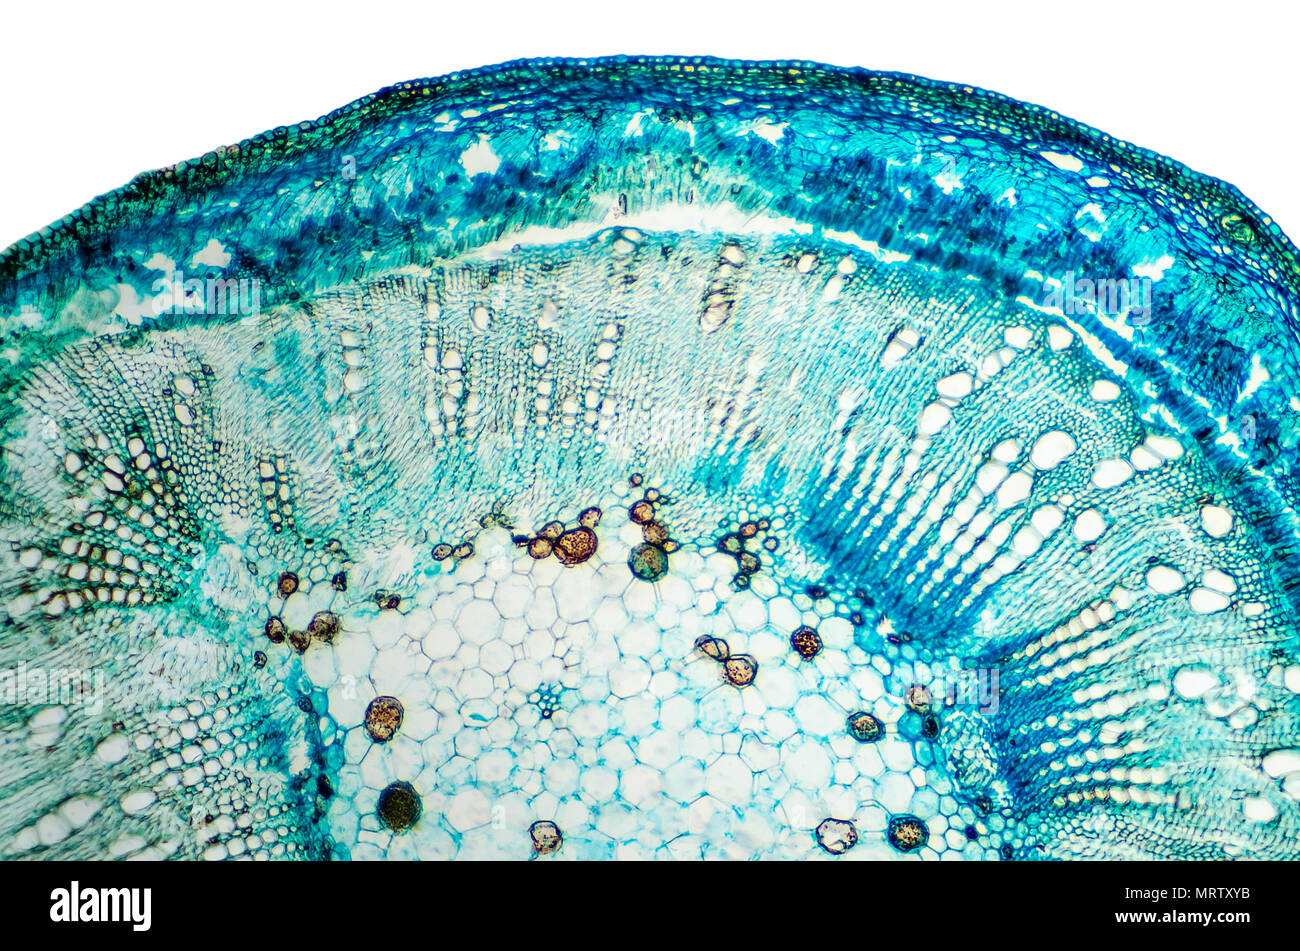 Stem of cotton cross section. Light microscope slide with microsection of plants of the genus Gossypium in the mallow family Malvaceae. Plant anatomy. Stock Photo